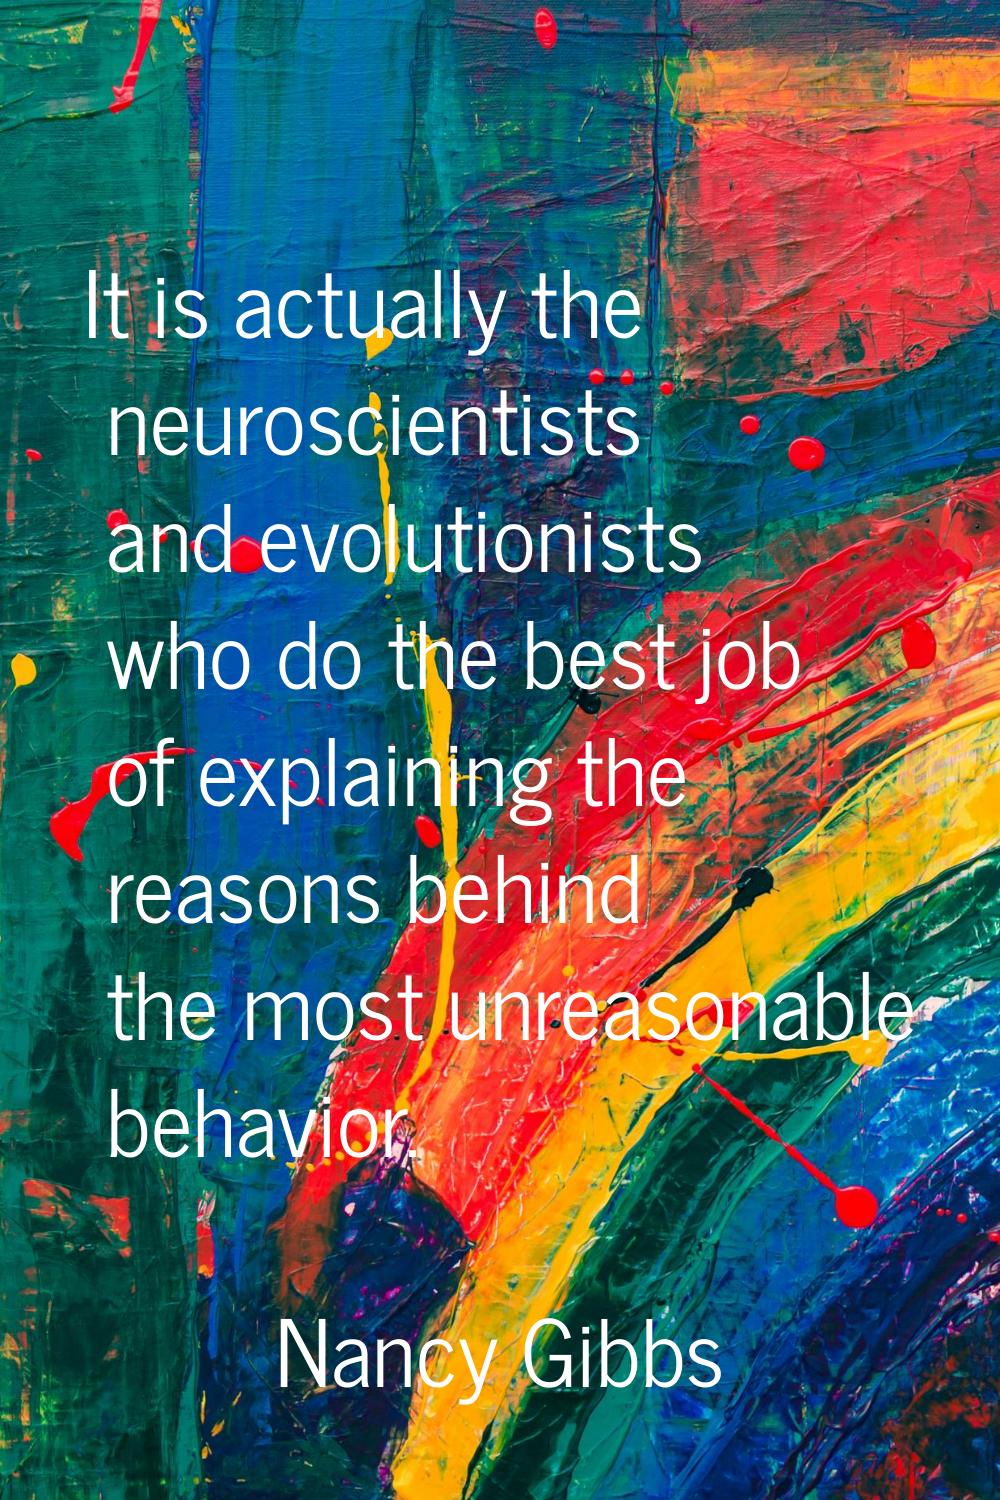 It is actually the neuroscientists and evolutionists who do the best job of explaining the reasons 